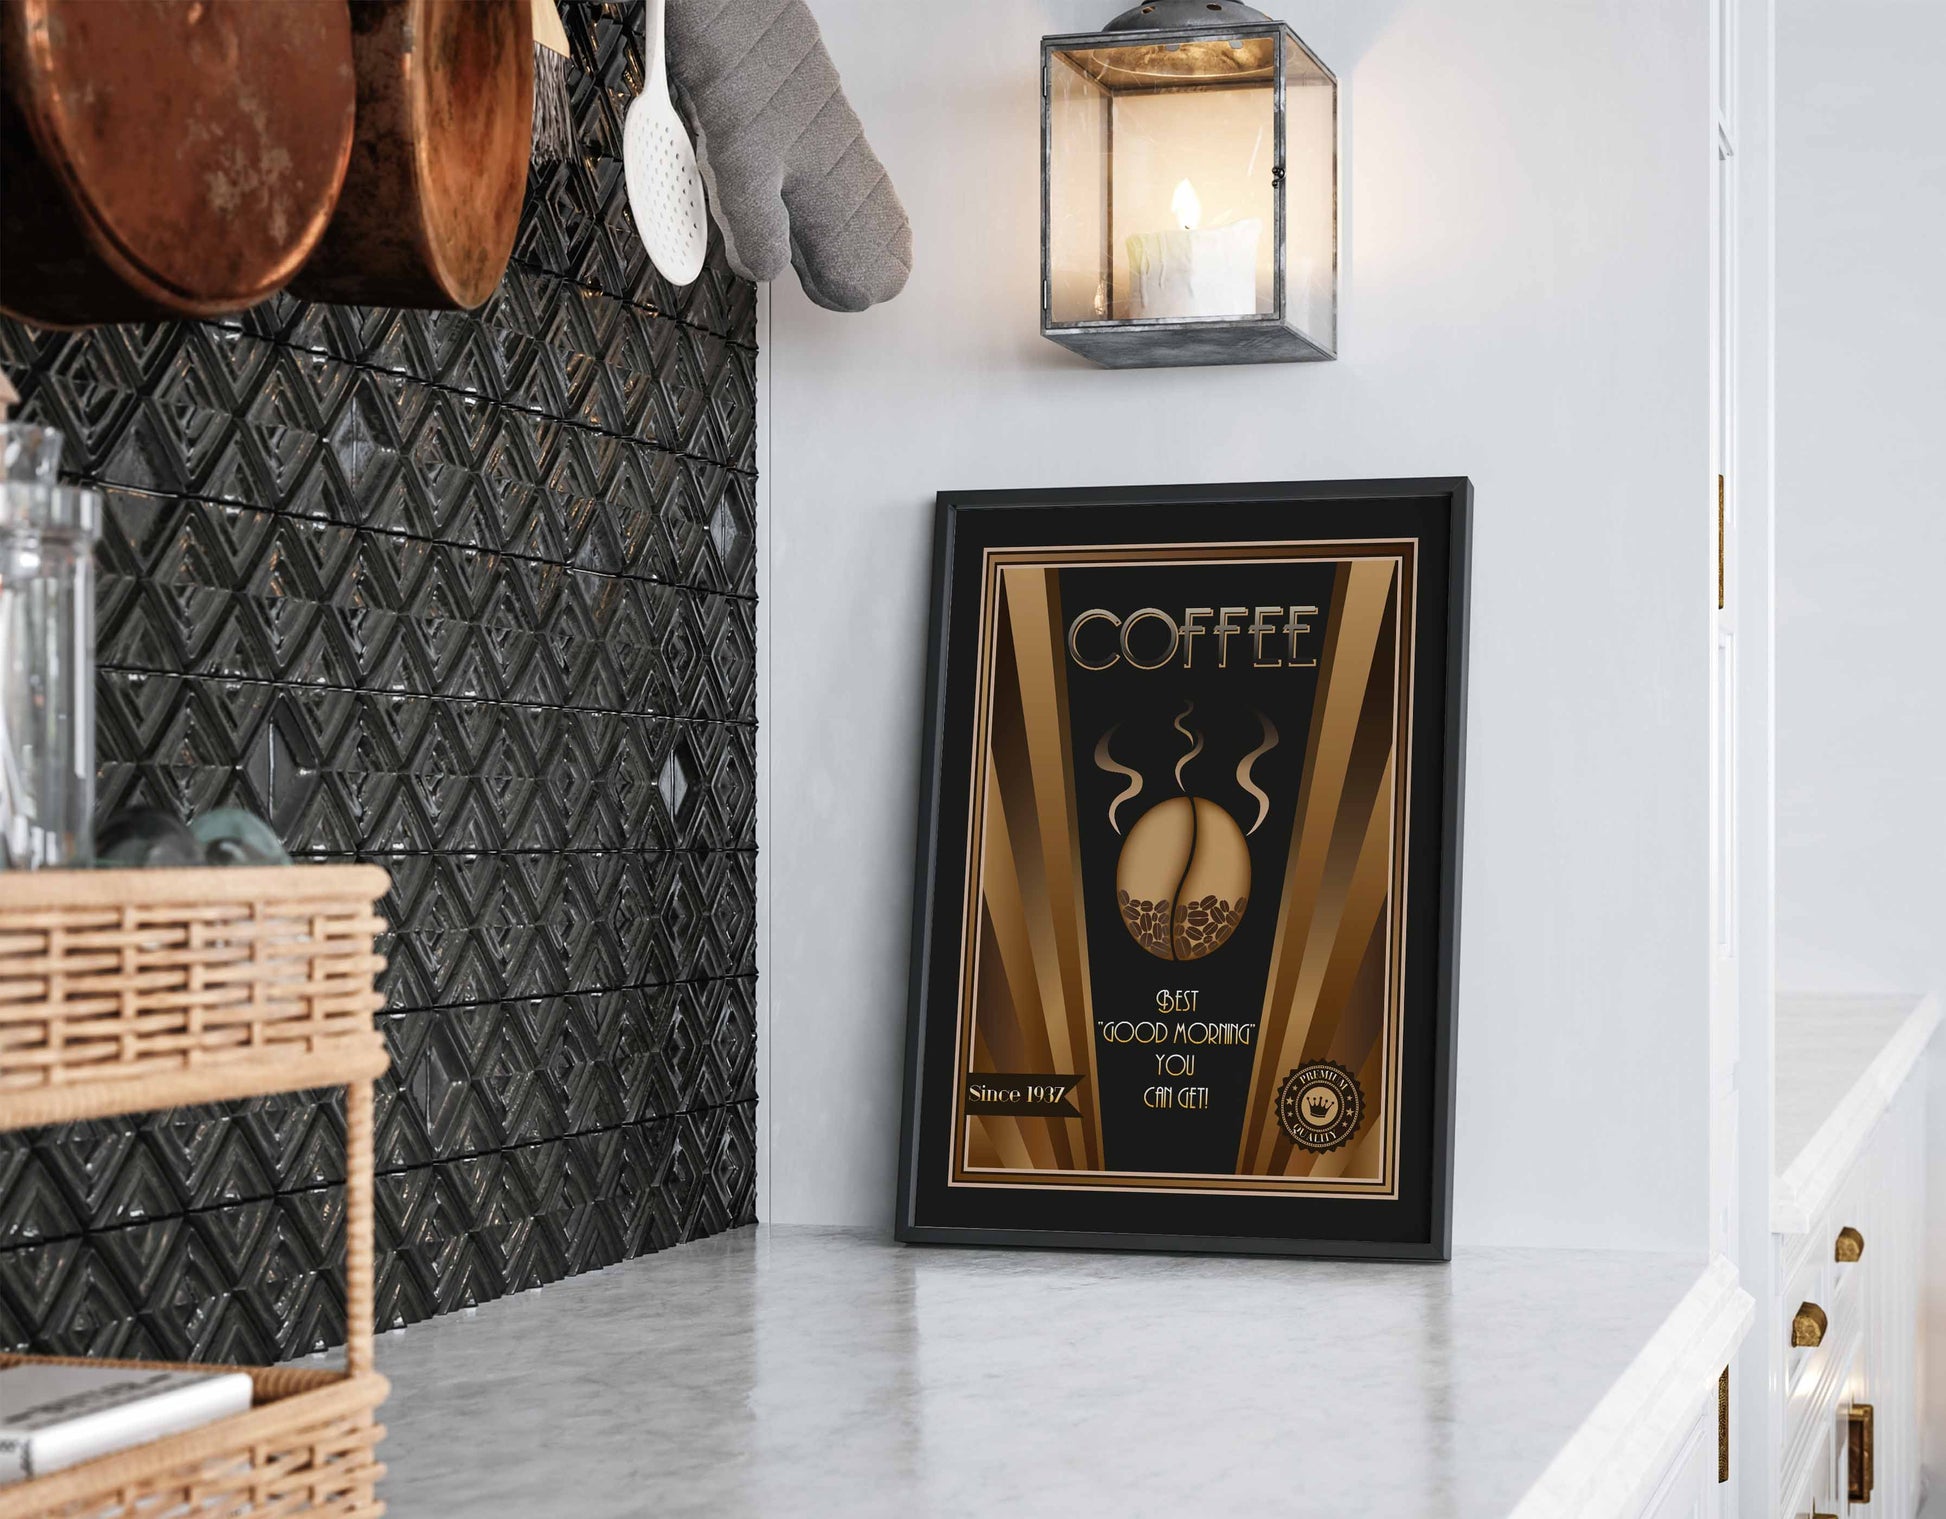 Kitchen print in an art deco style, with a coffee slogan and design